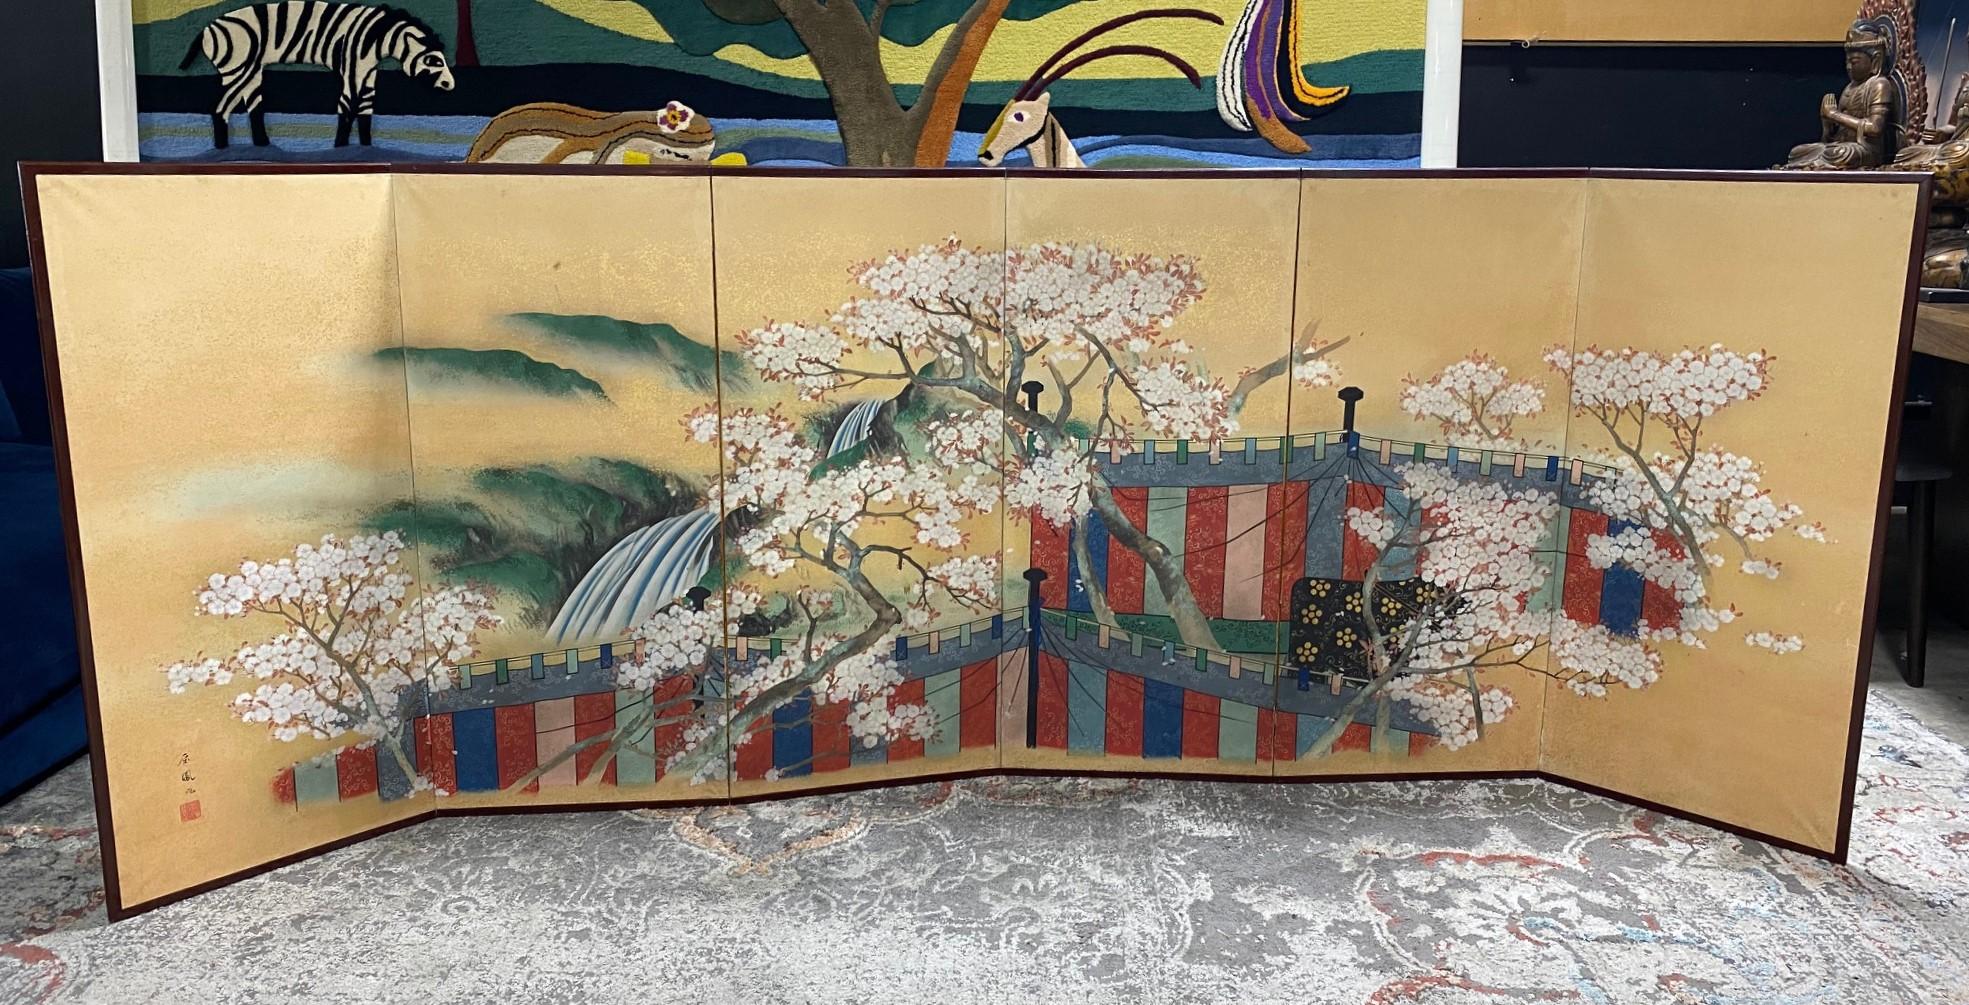 A gorgeous six-panel Japanese Asian Byobu folding screen depicting a cherry blossom viewing pavilion/picnic scene. The colorful cloths are privacy curtains arranged for an exclusive party or gathering most likely for an esteemed nobleman and his